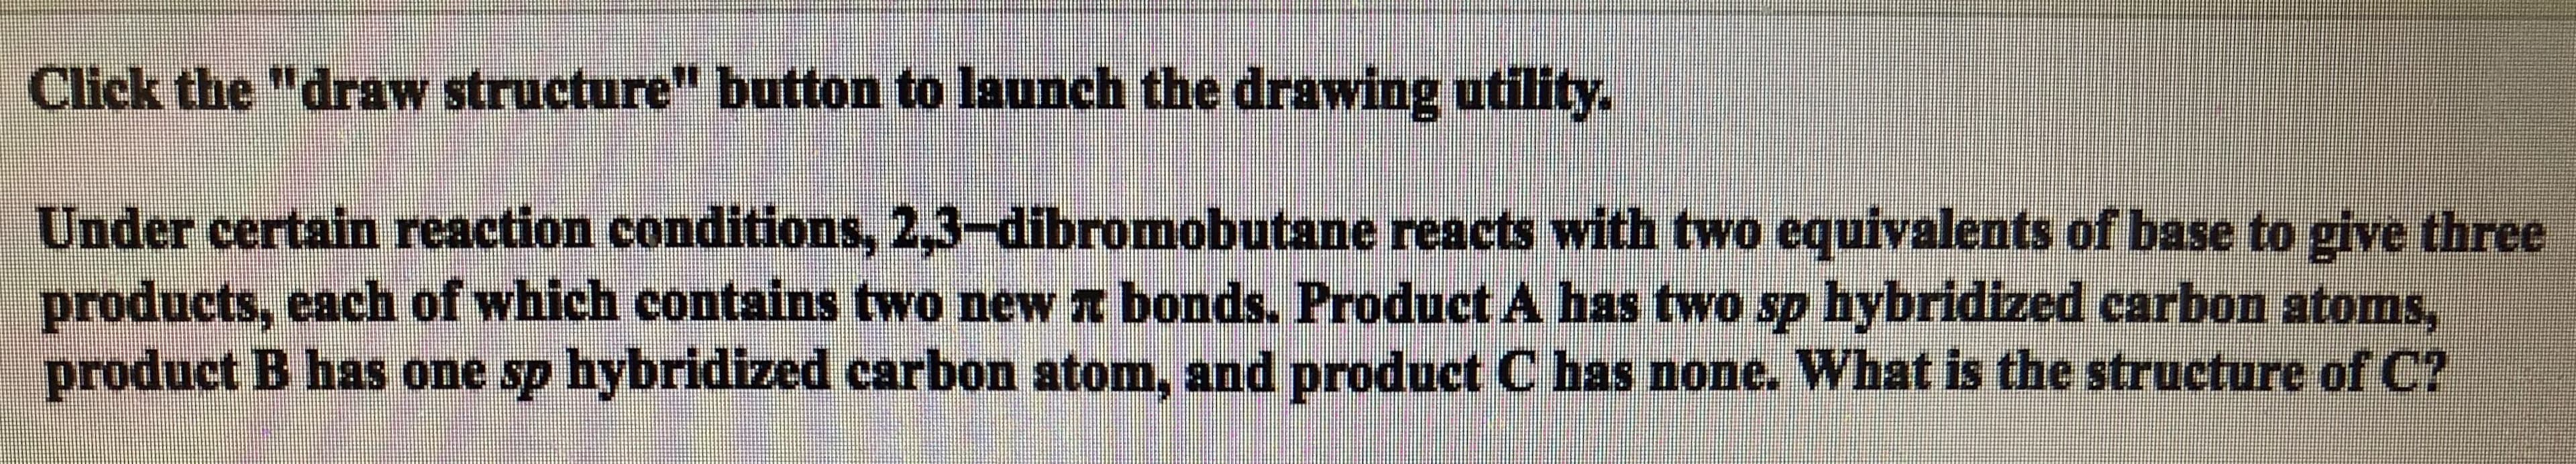 Click the "draw structure" button to launch the drawing utility.
Under certain reaction conditions, 2,3-dibromobutane reacts with two equivalents of base to give three
products, each of which contains two new T bonds. Product A has two sp hybridized carbon atoms,
product B has one sp hybridized carbon atom, and product C has none. What is the structure of C?
